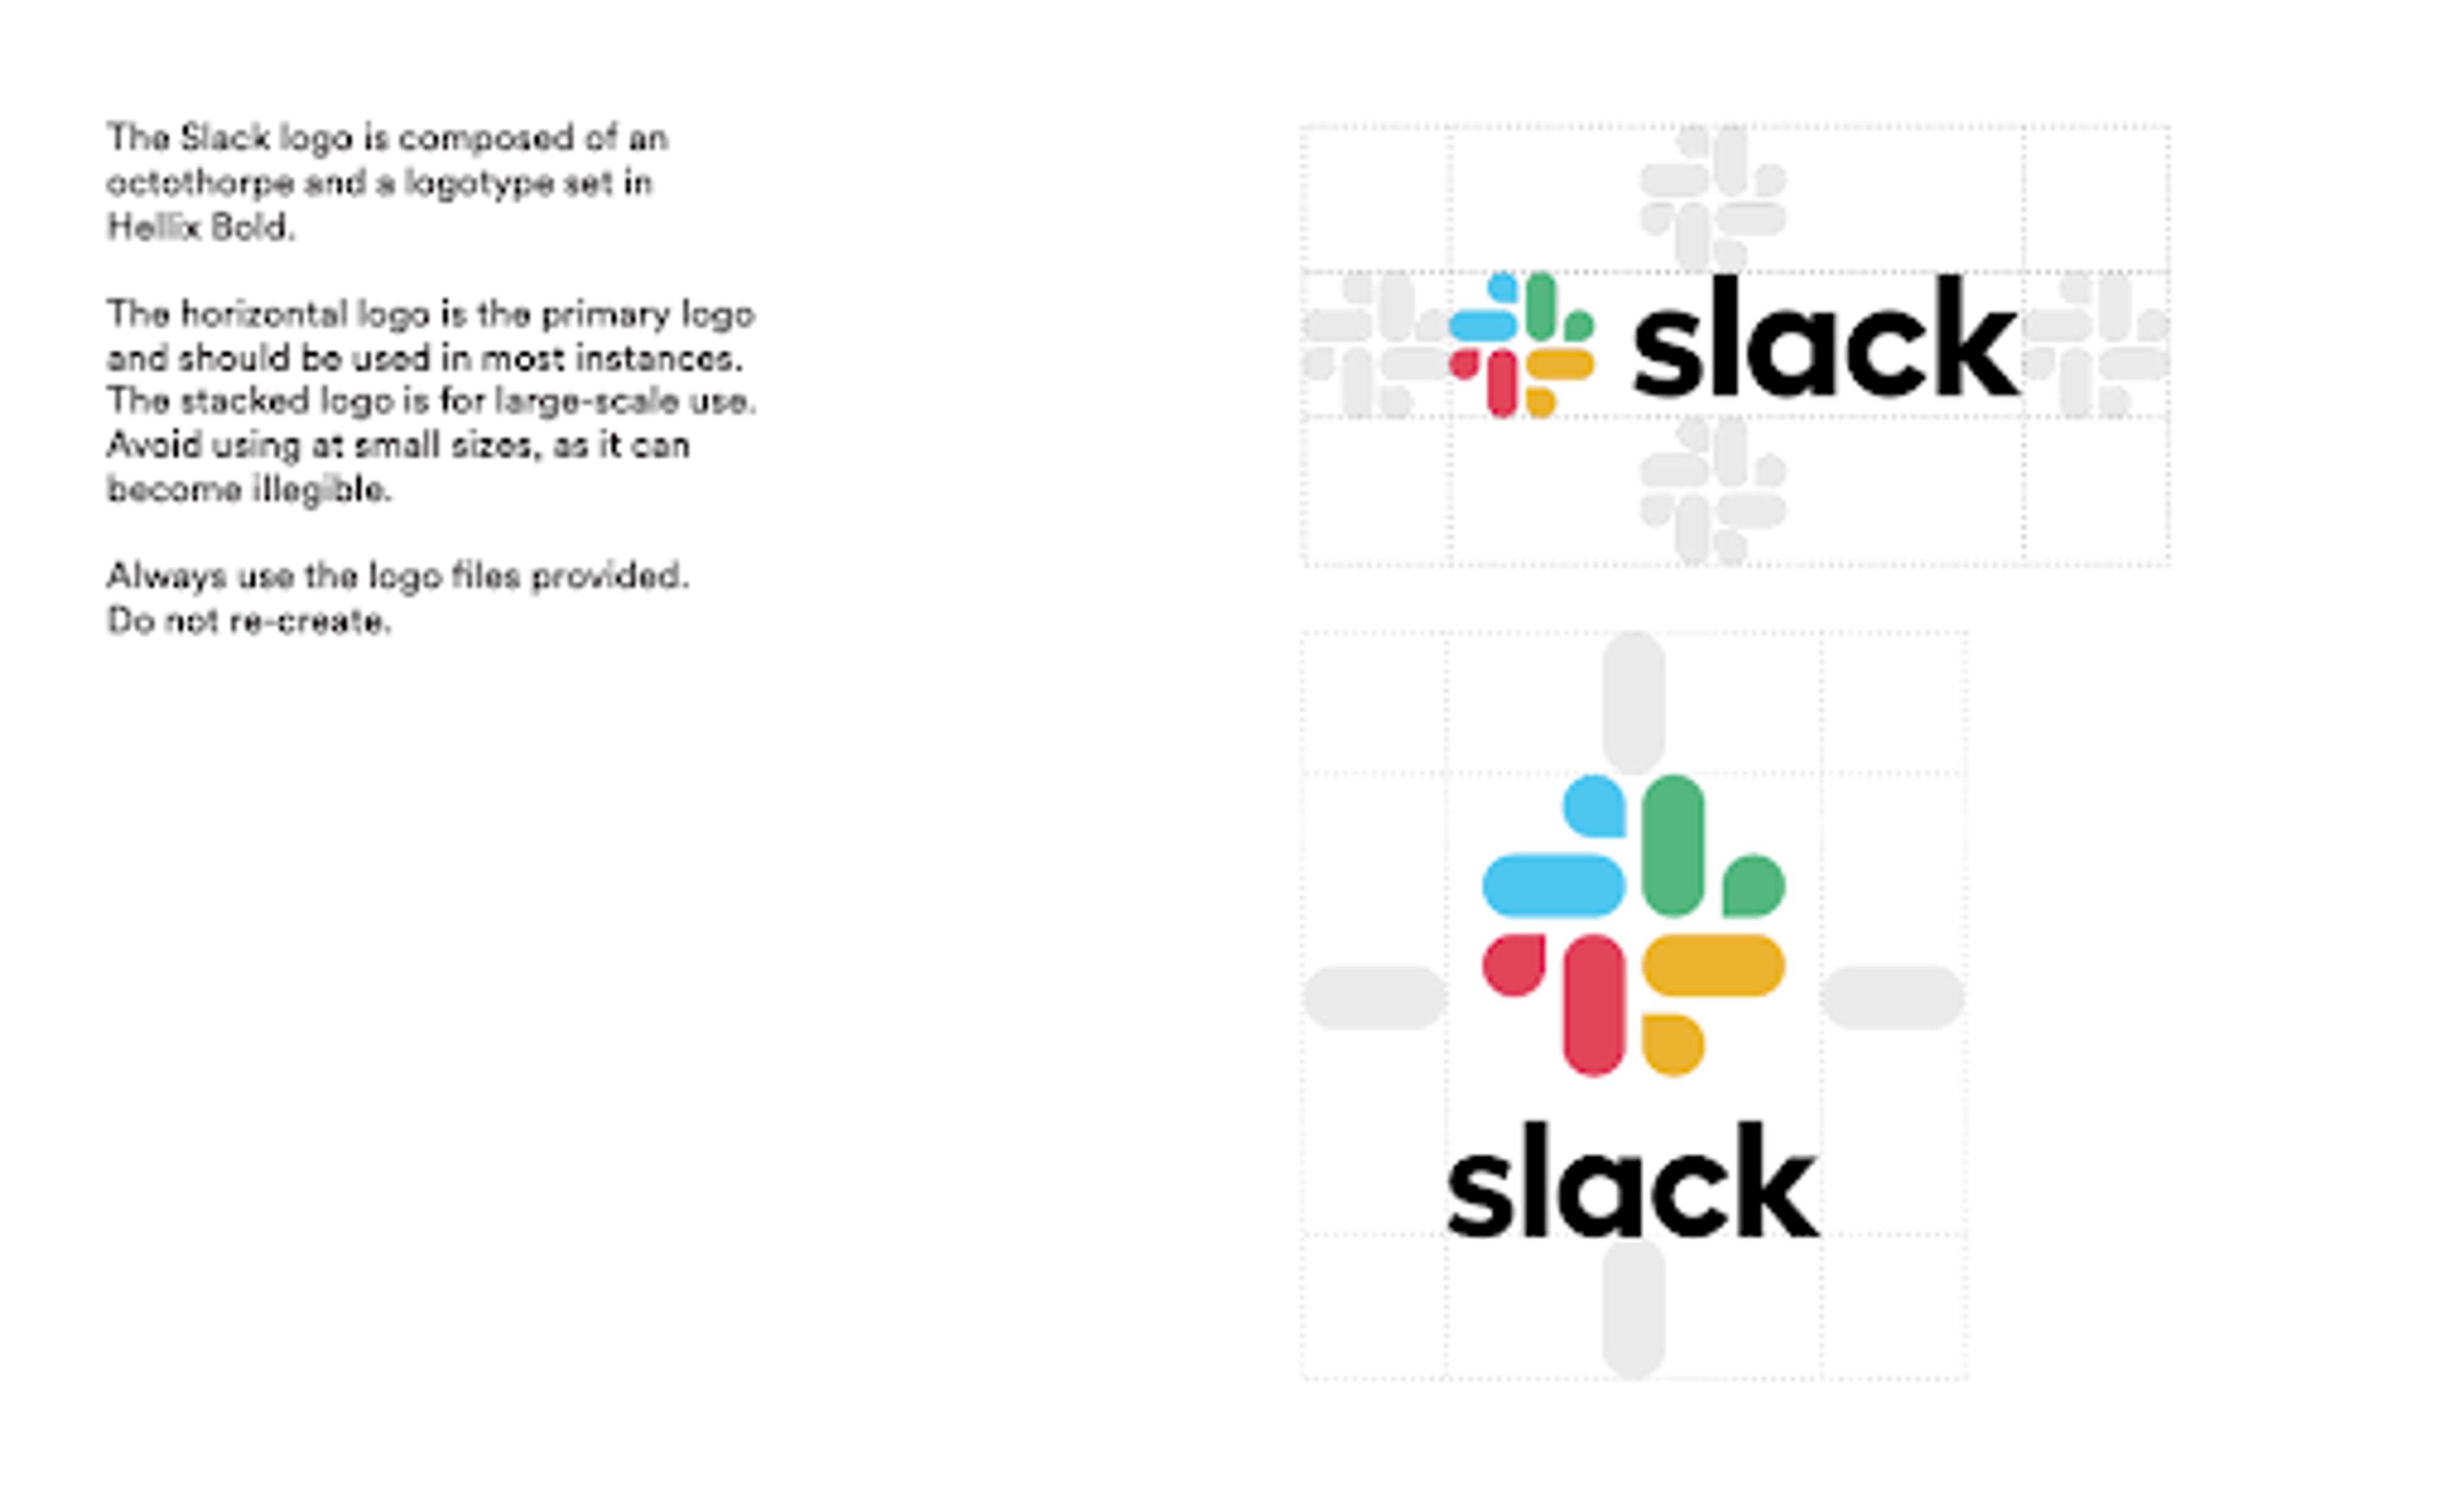 The cover page of Slack's brand guidelines